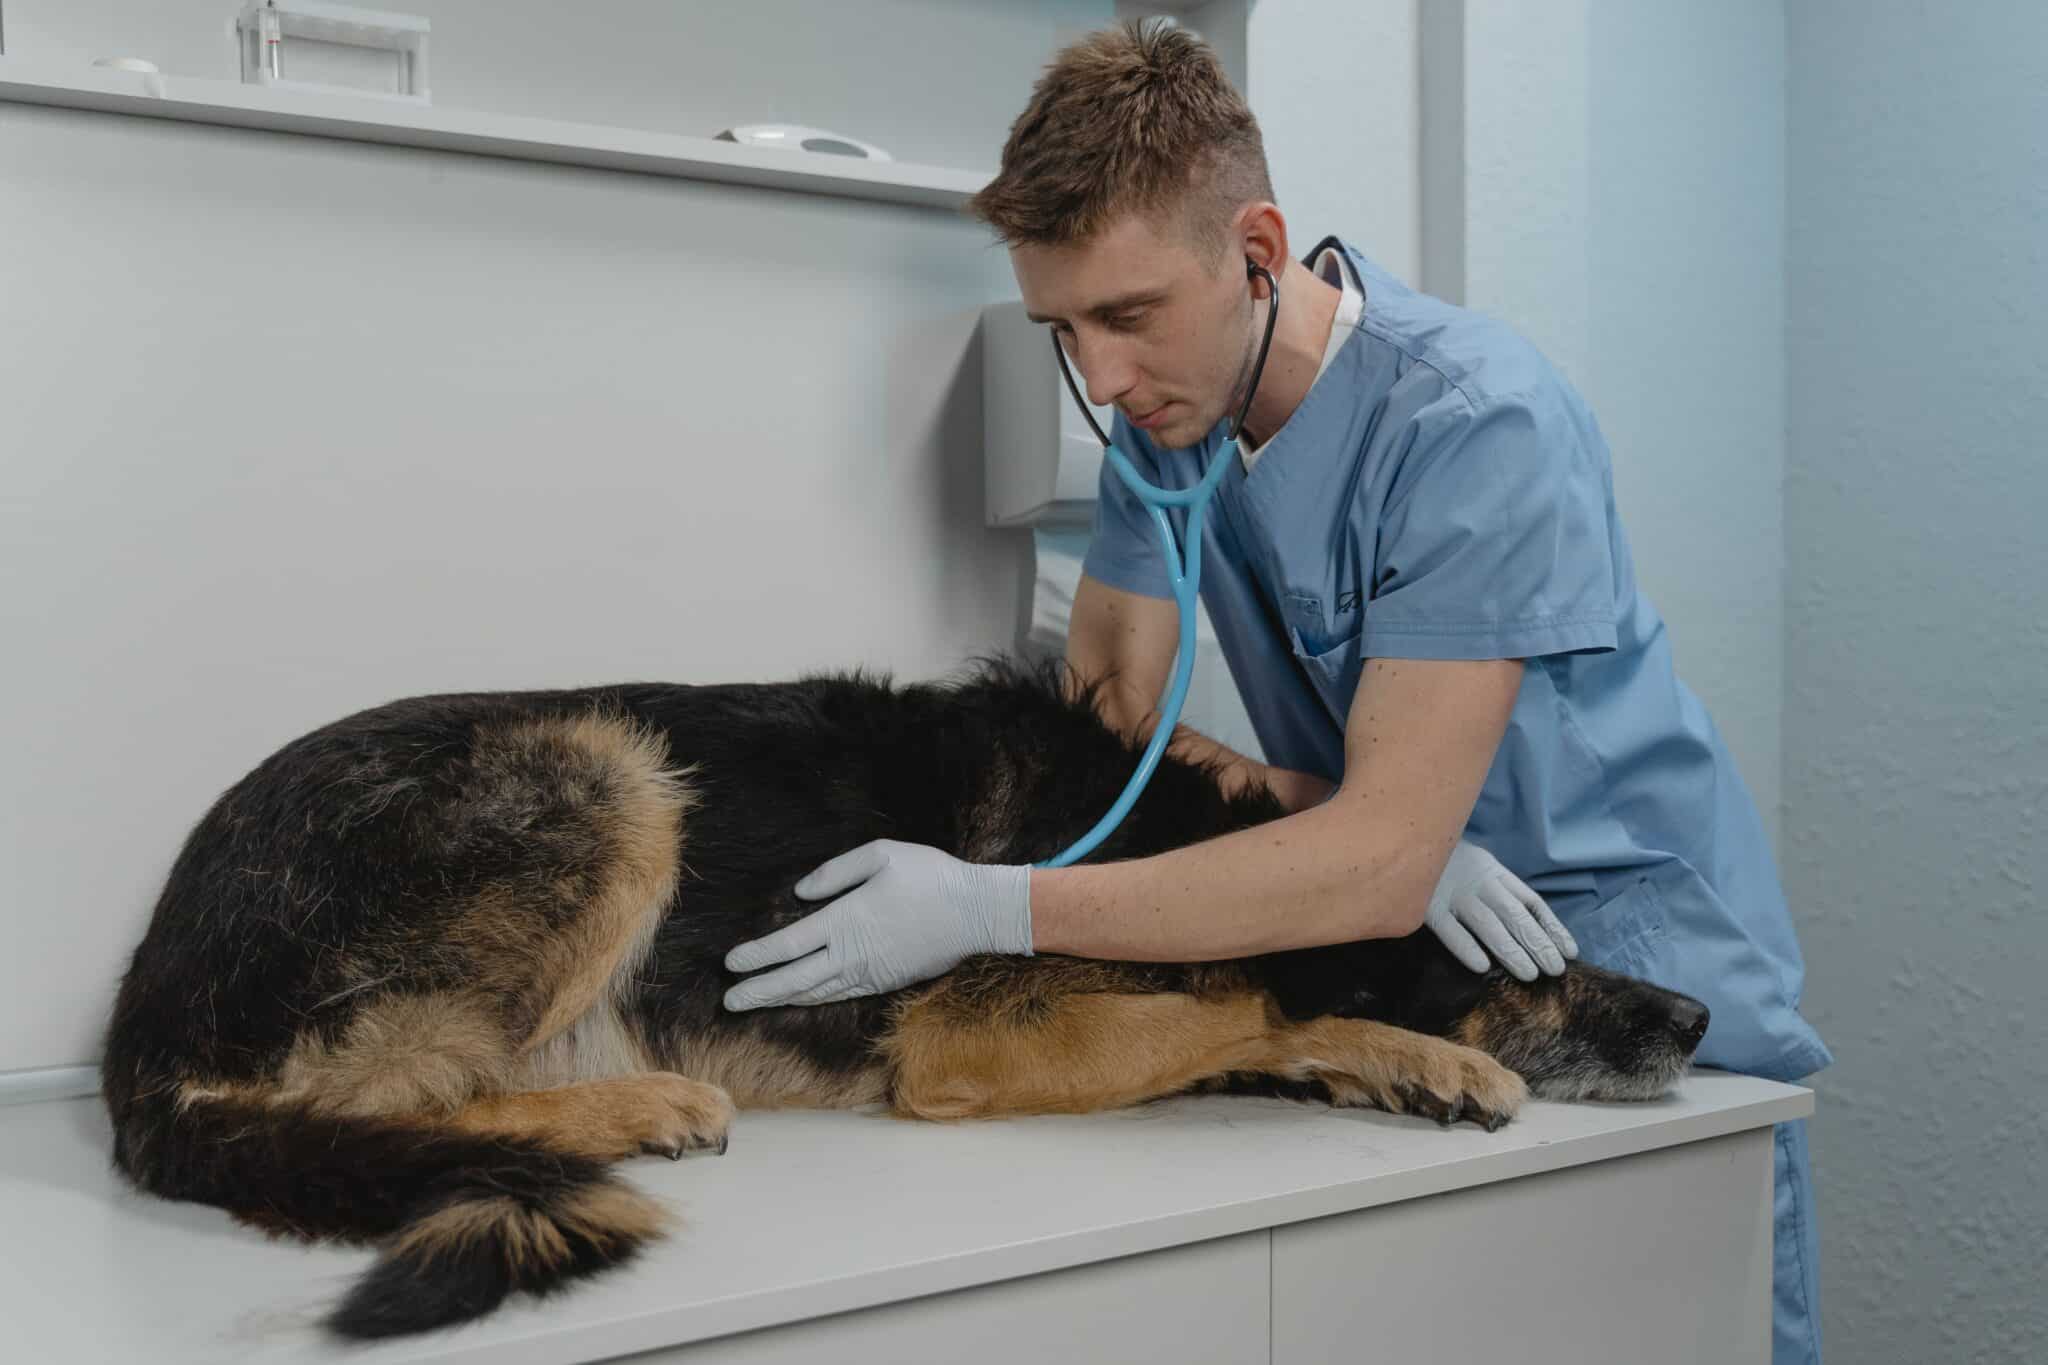 An old dog getting examined by a vet